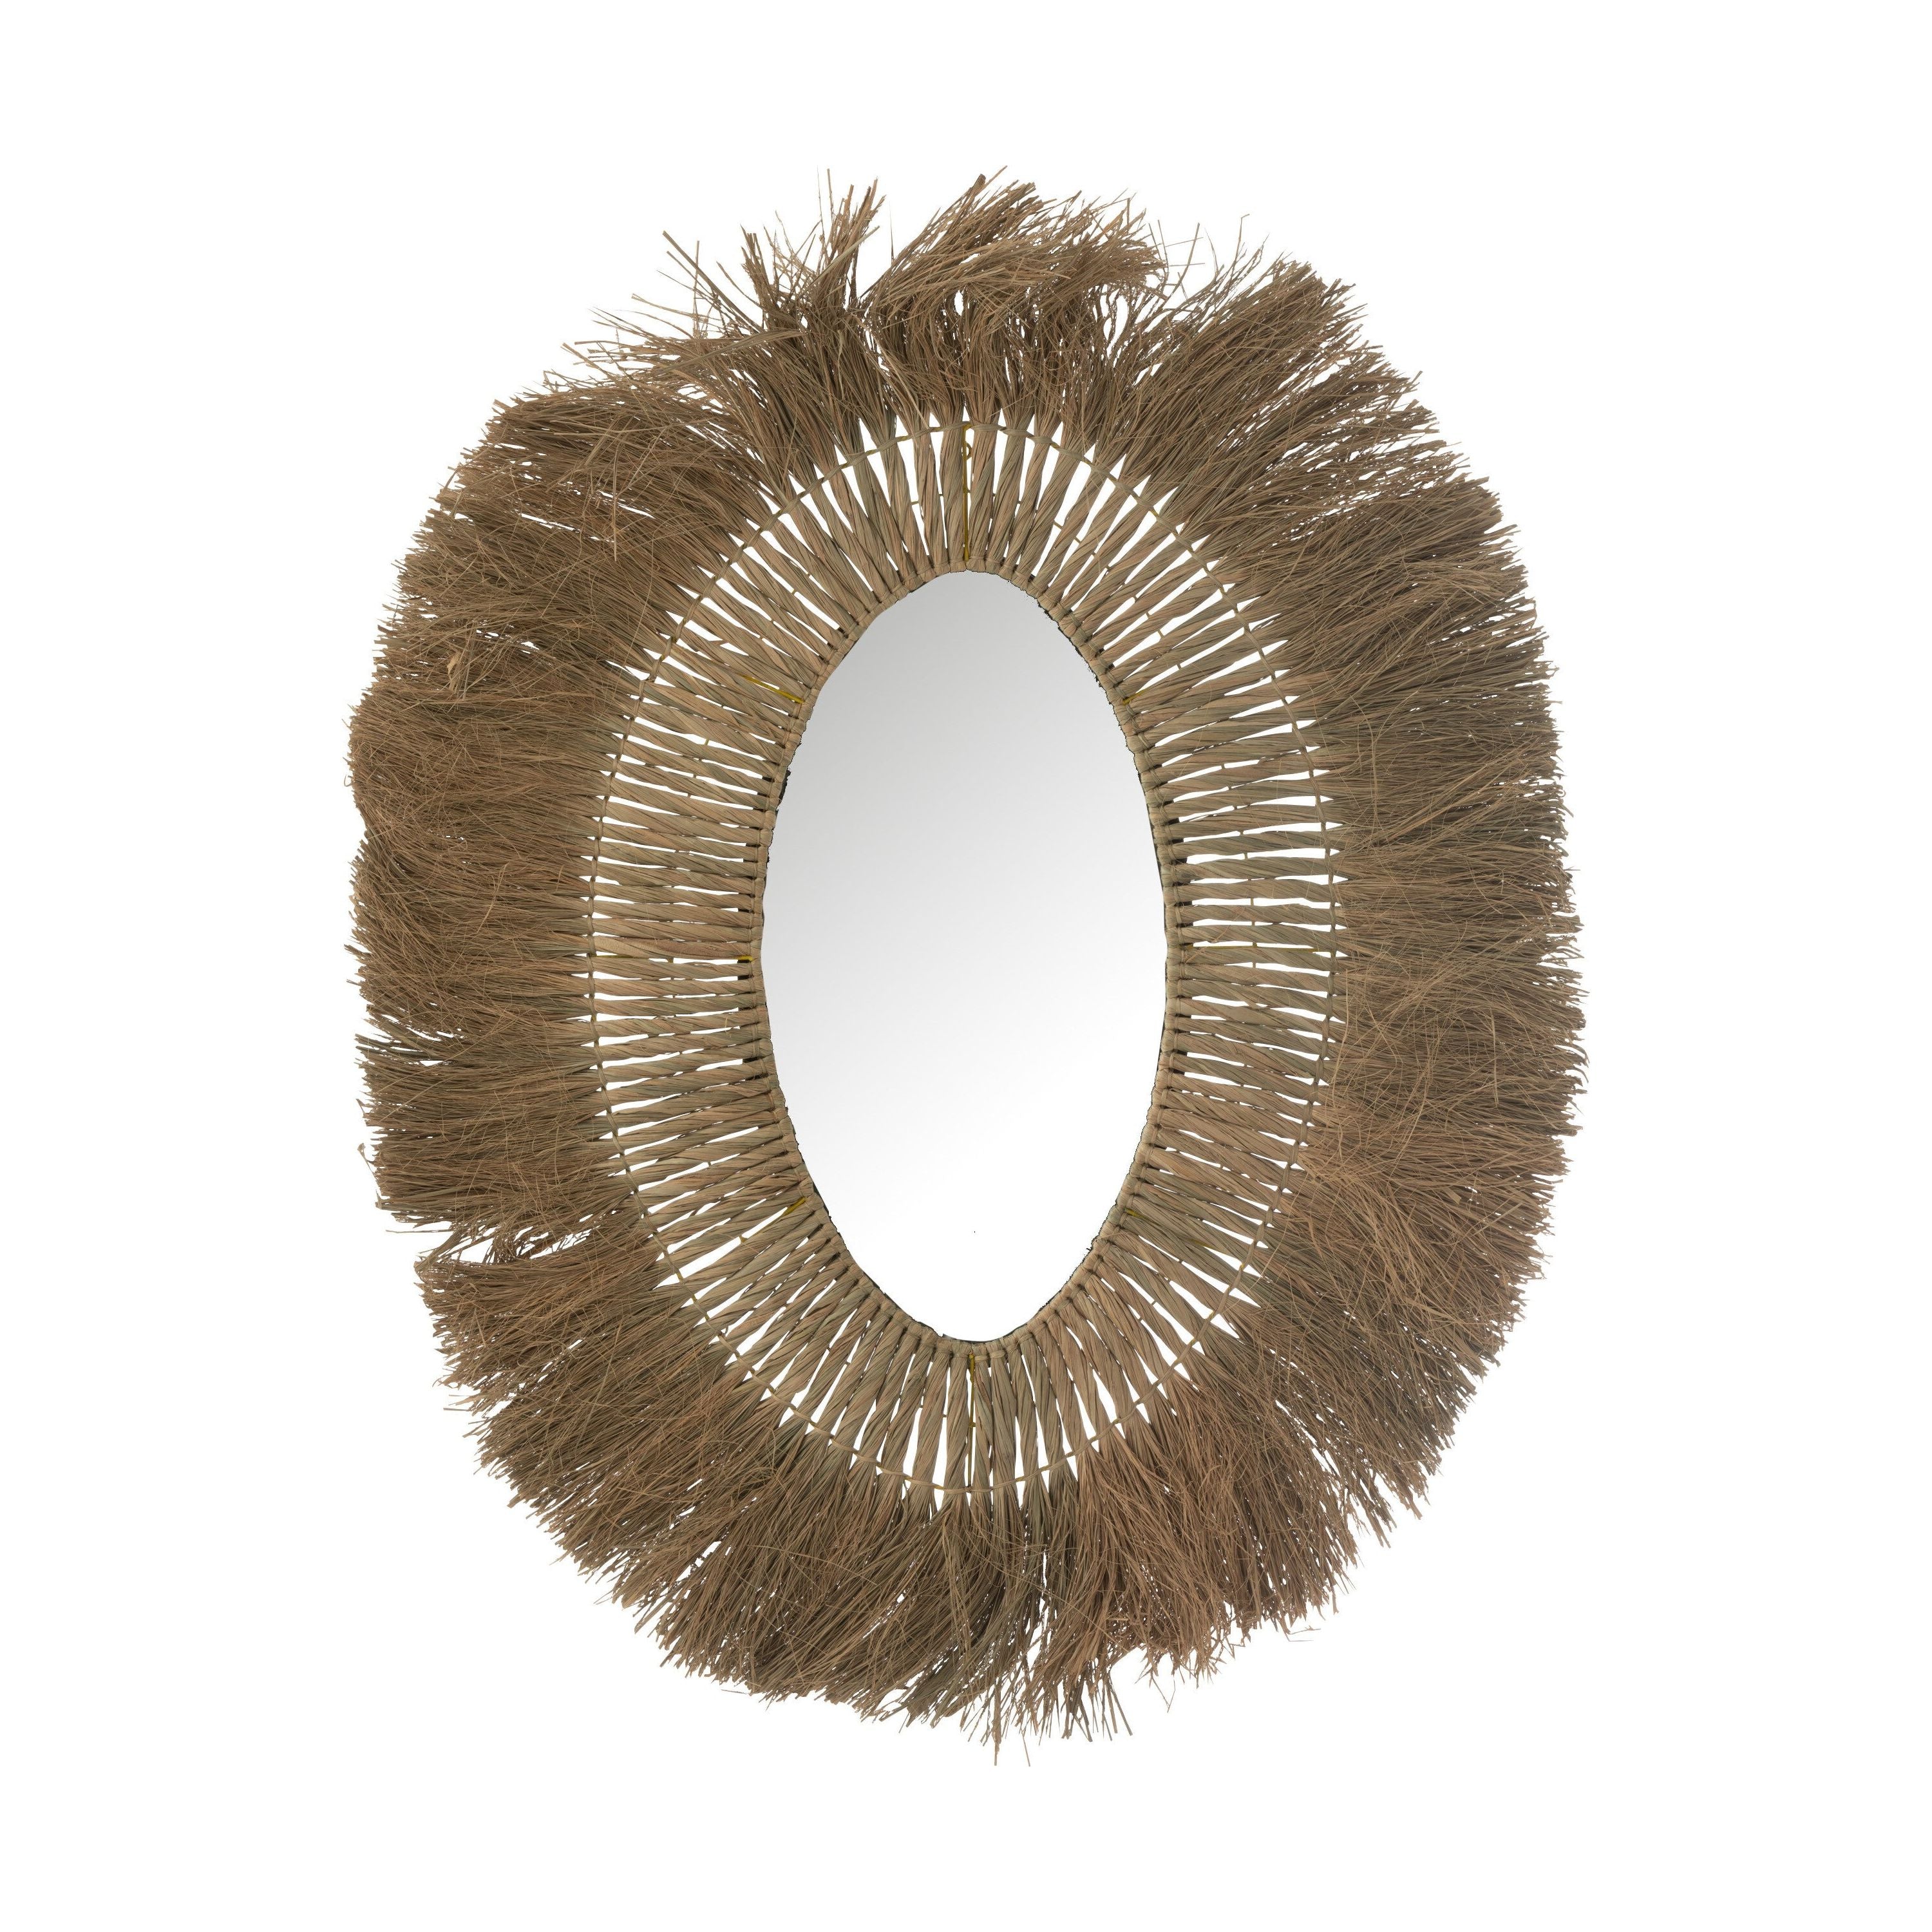 Mirror Oval Braided Grass Natural